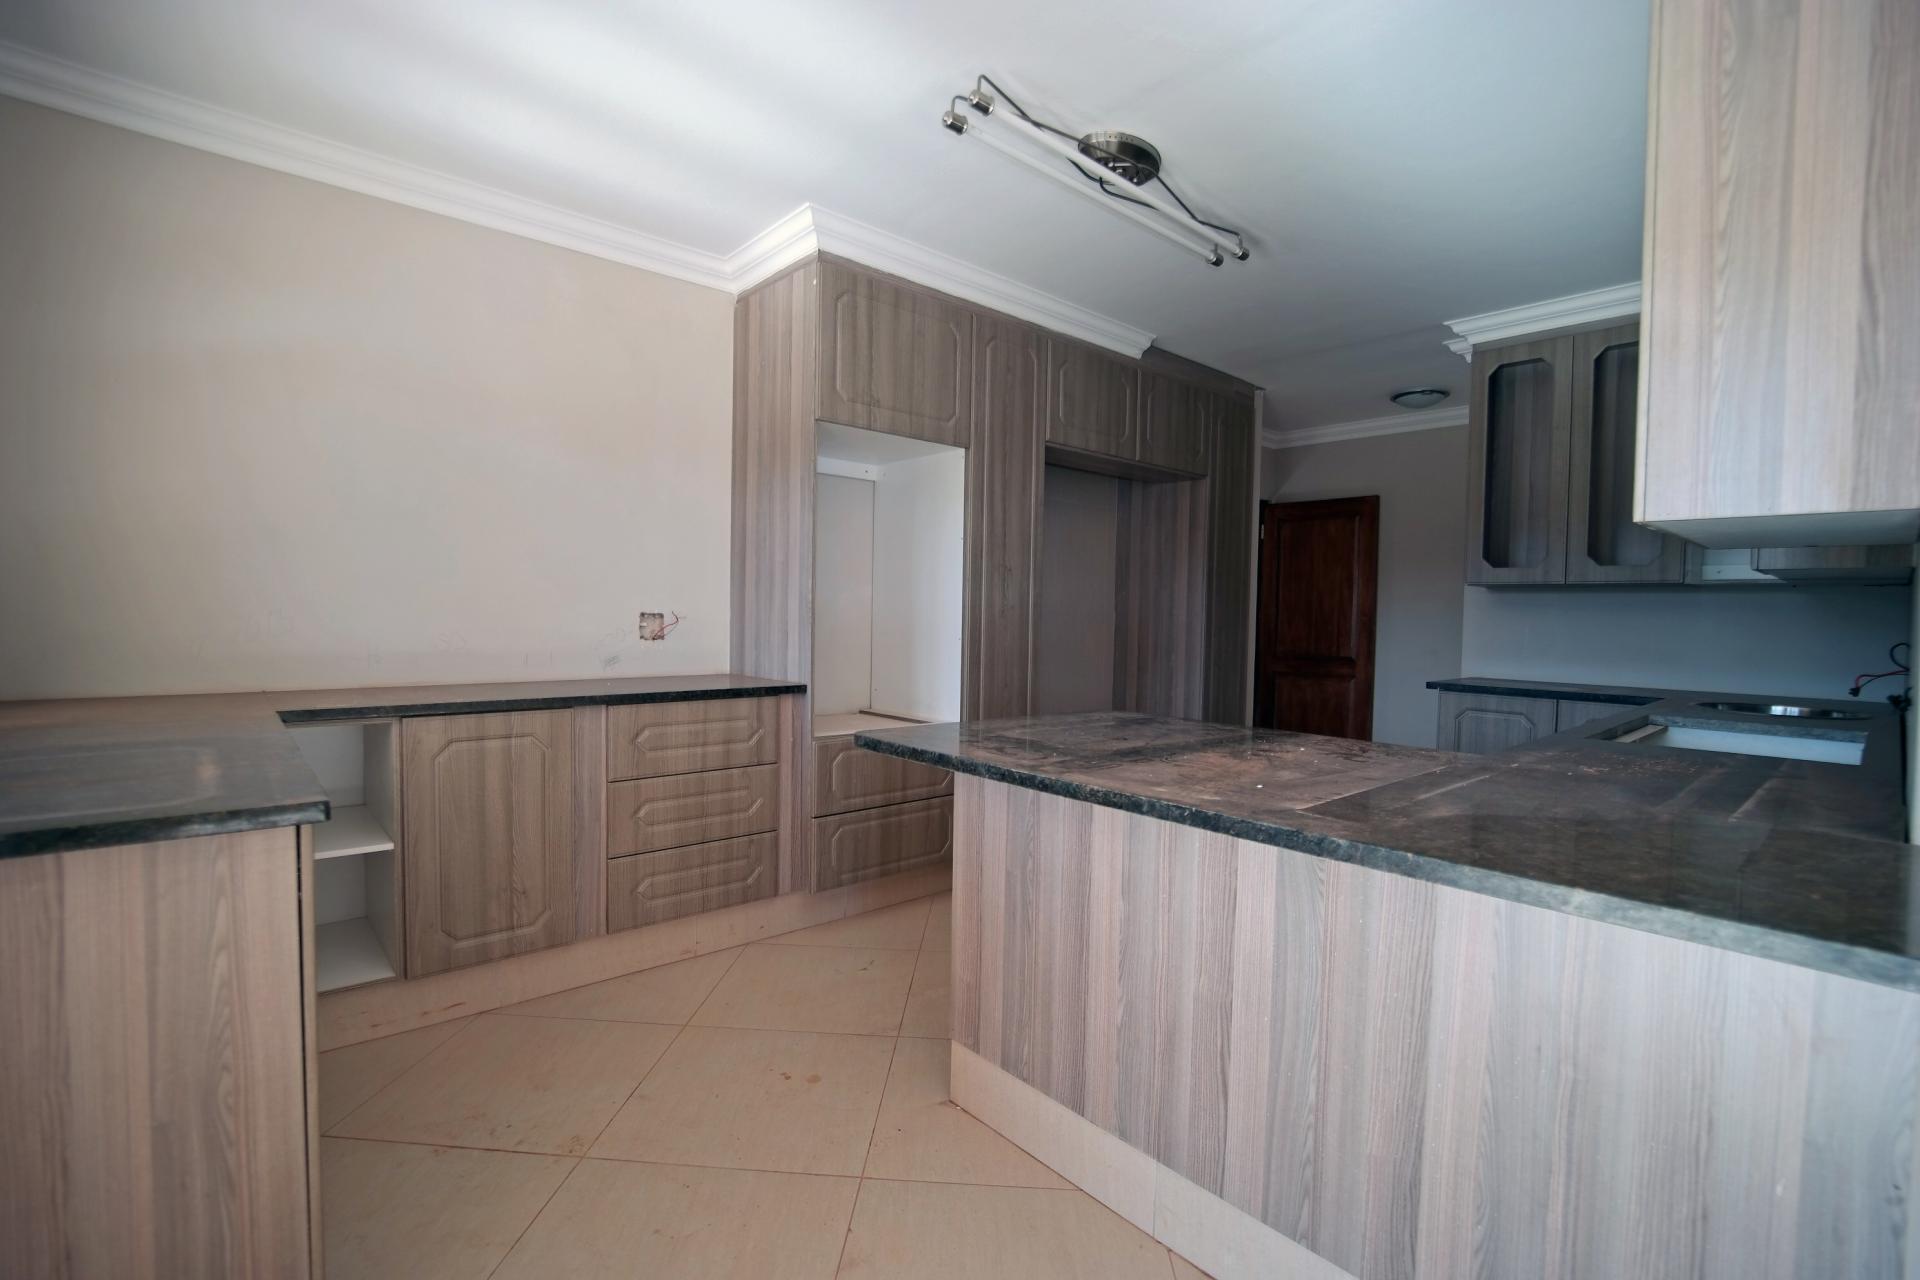 Kitchen - 25 square meters of property in The Wilds Estate